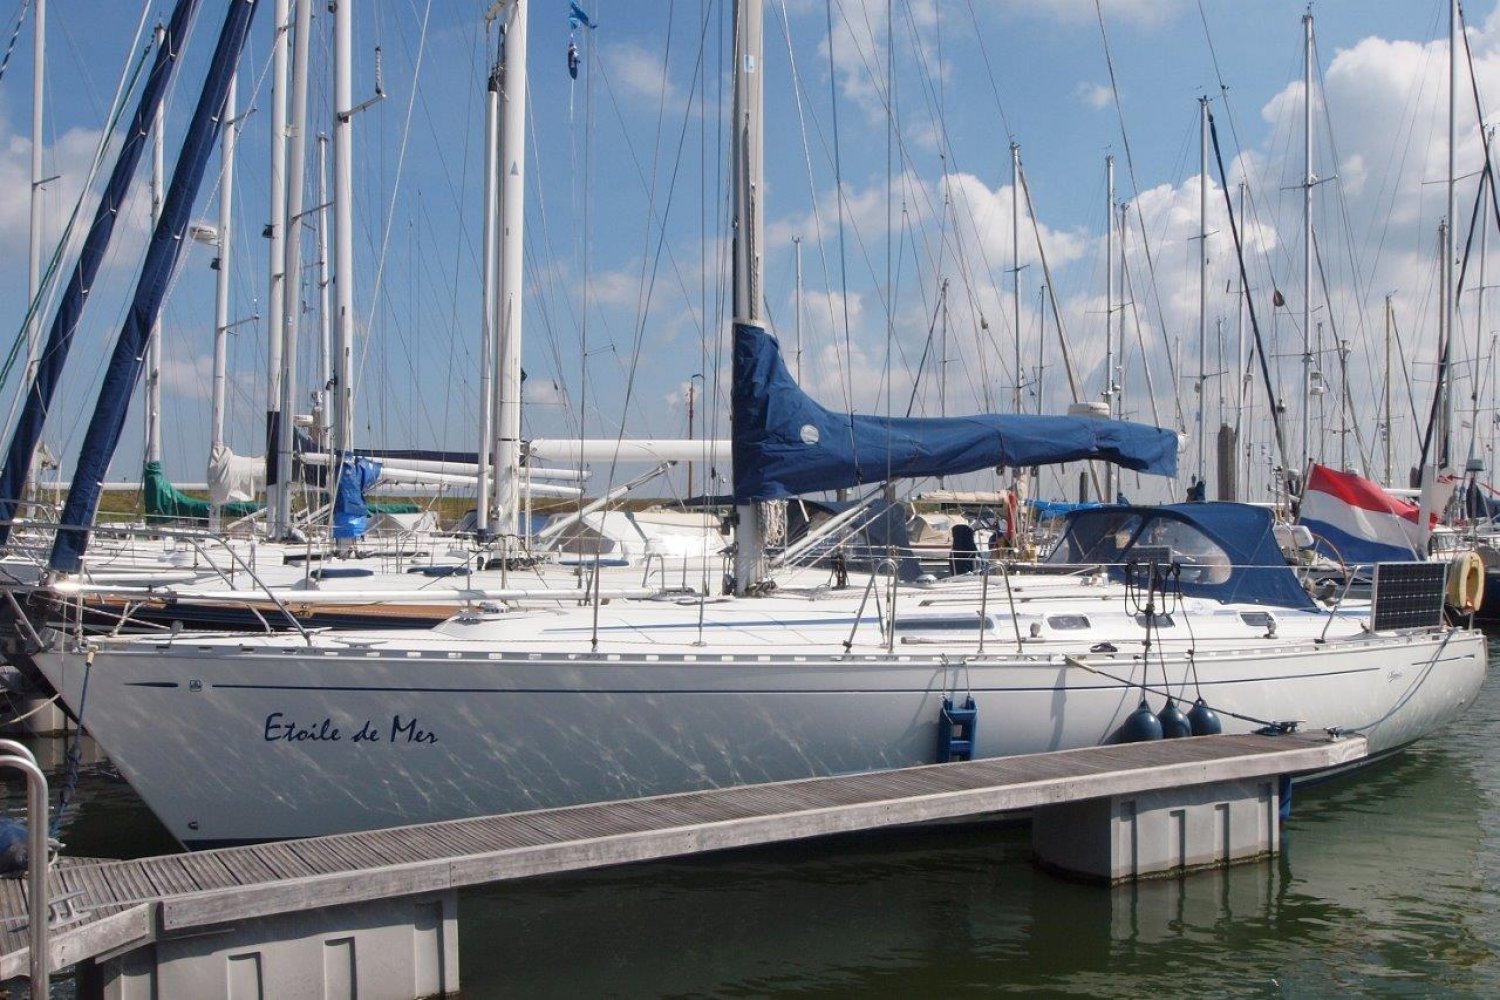 dufour 41 sailboat for sale